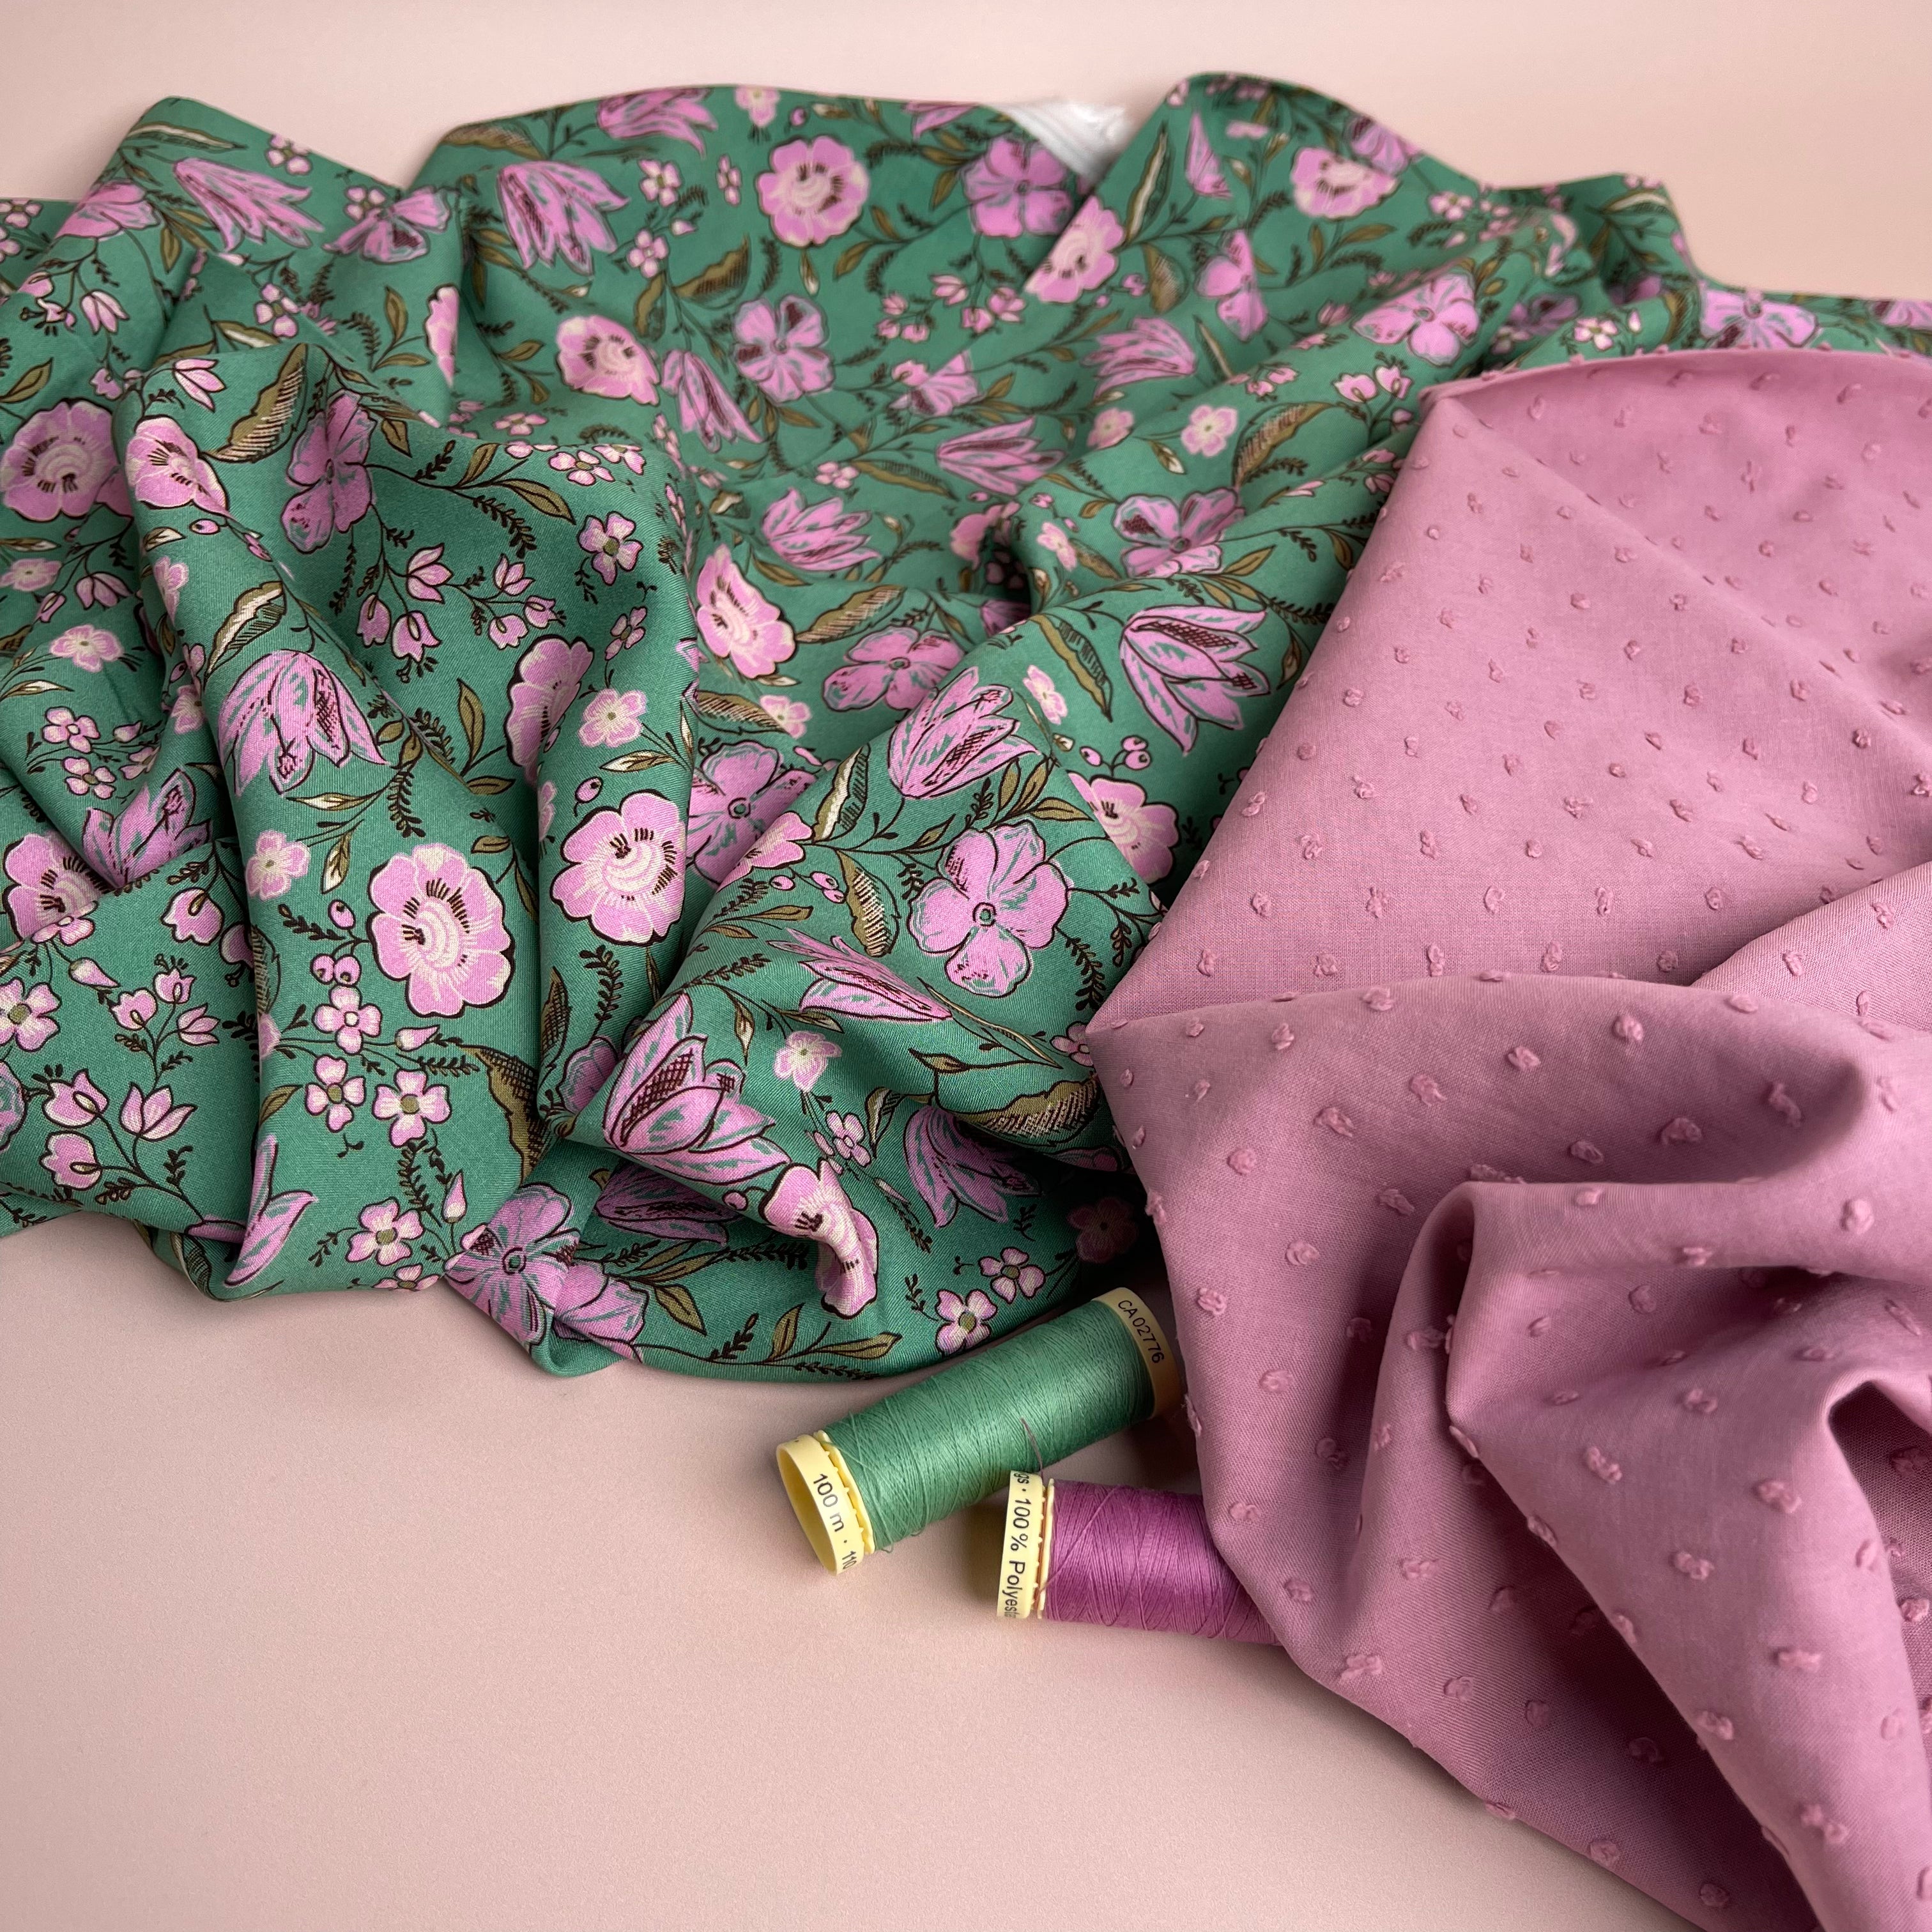 Atelier Jupe - Plumetis in Lilac Dobby Cotton Fabric